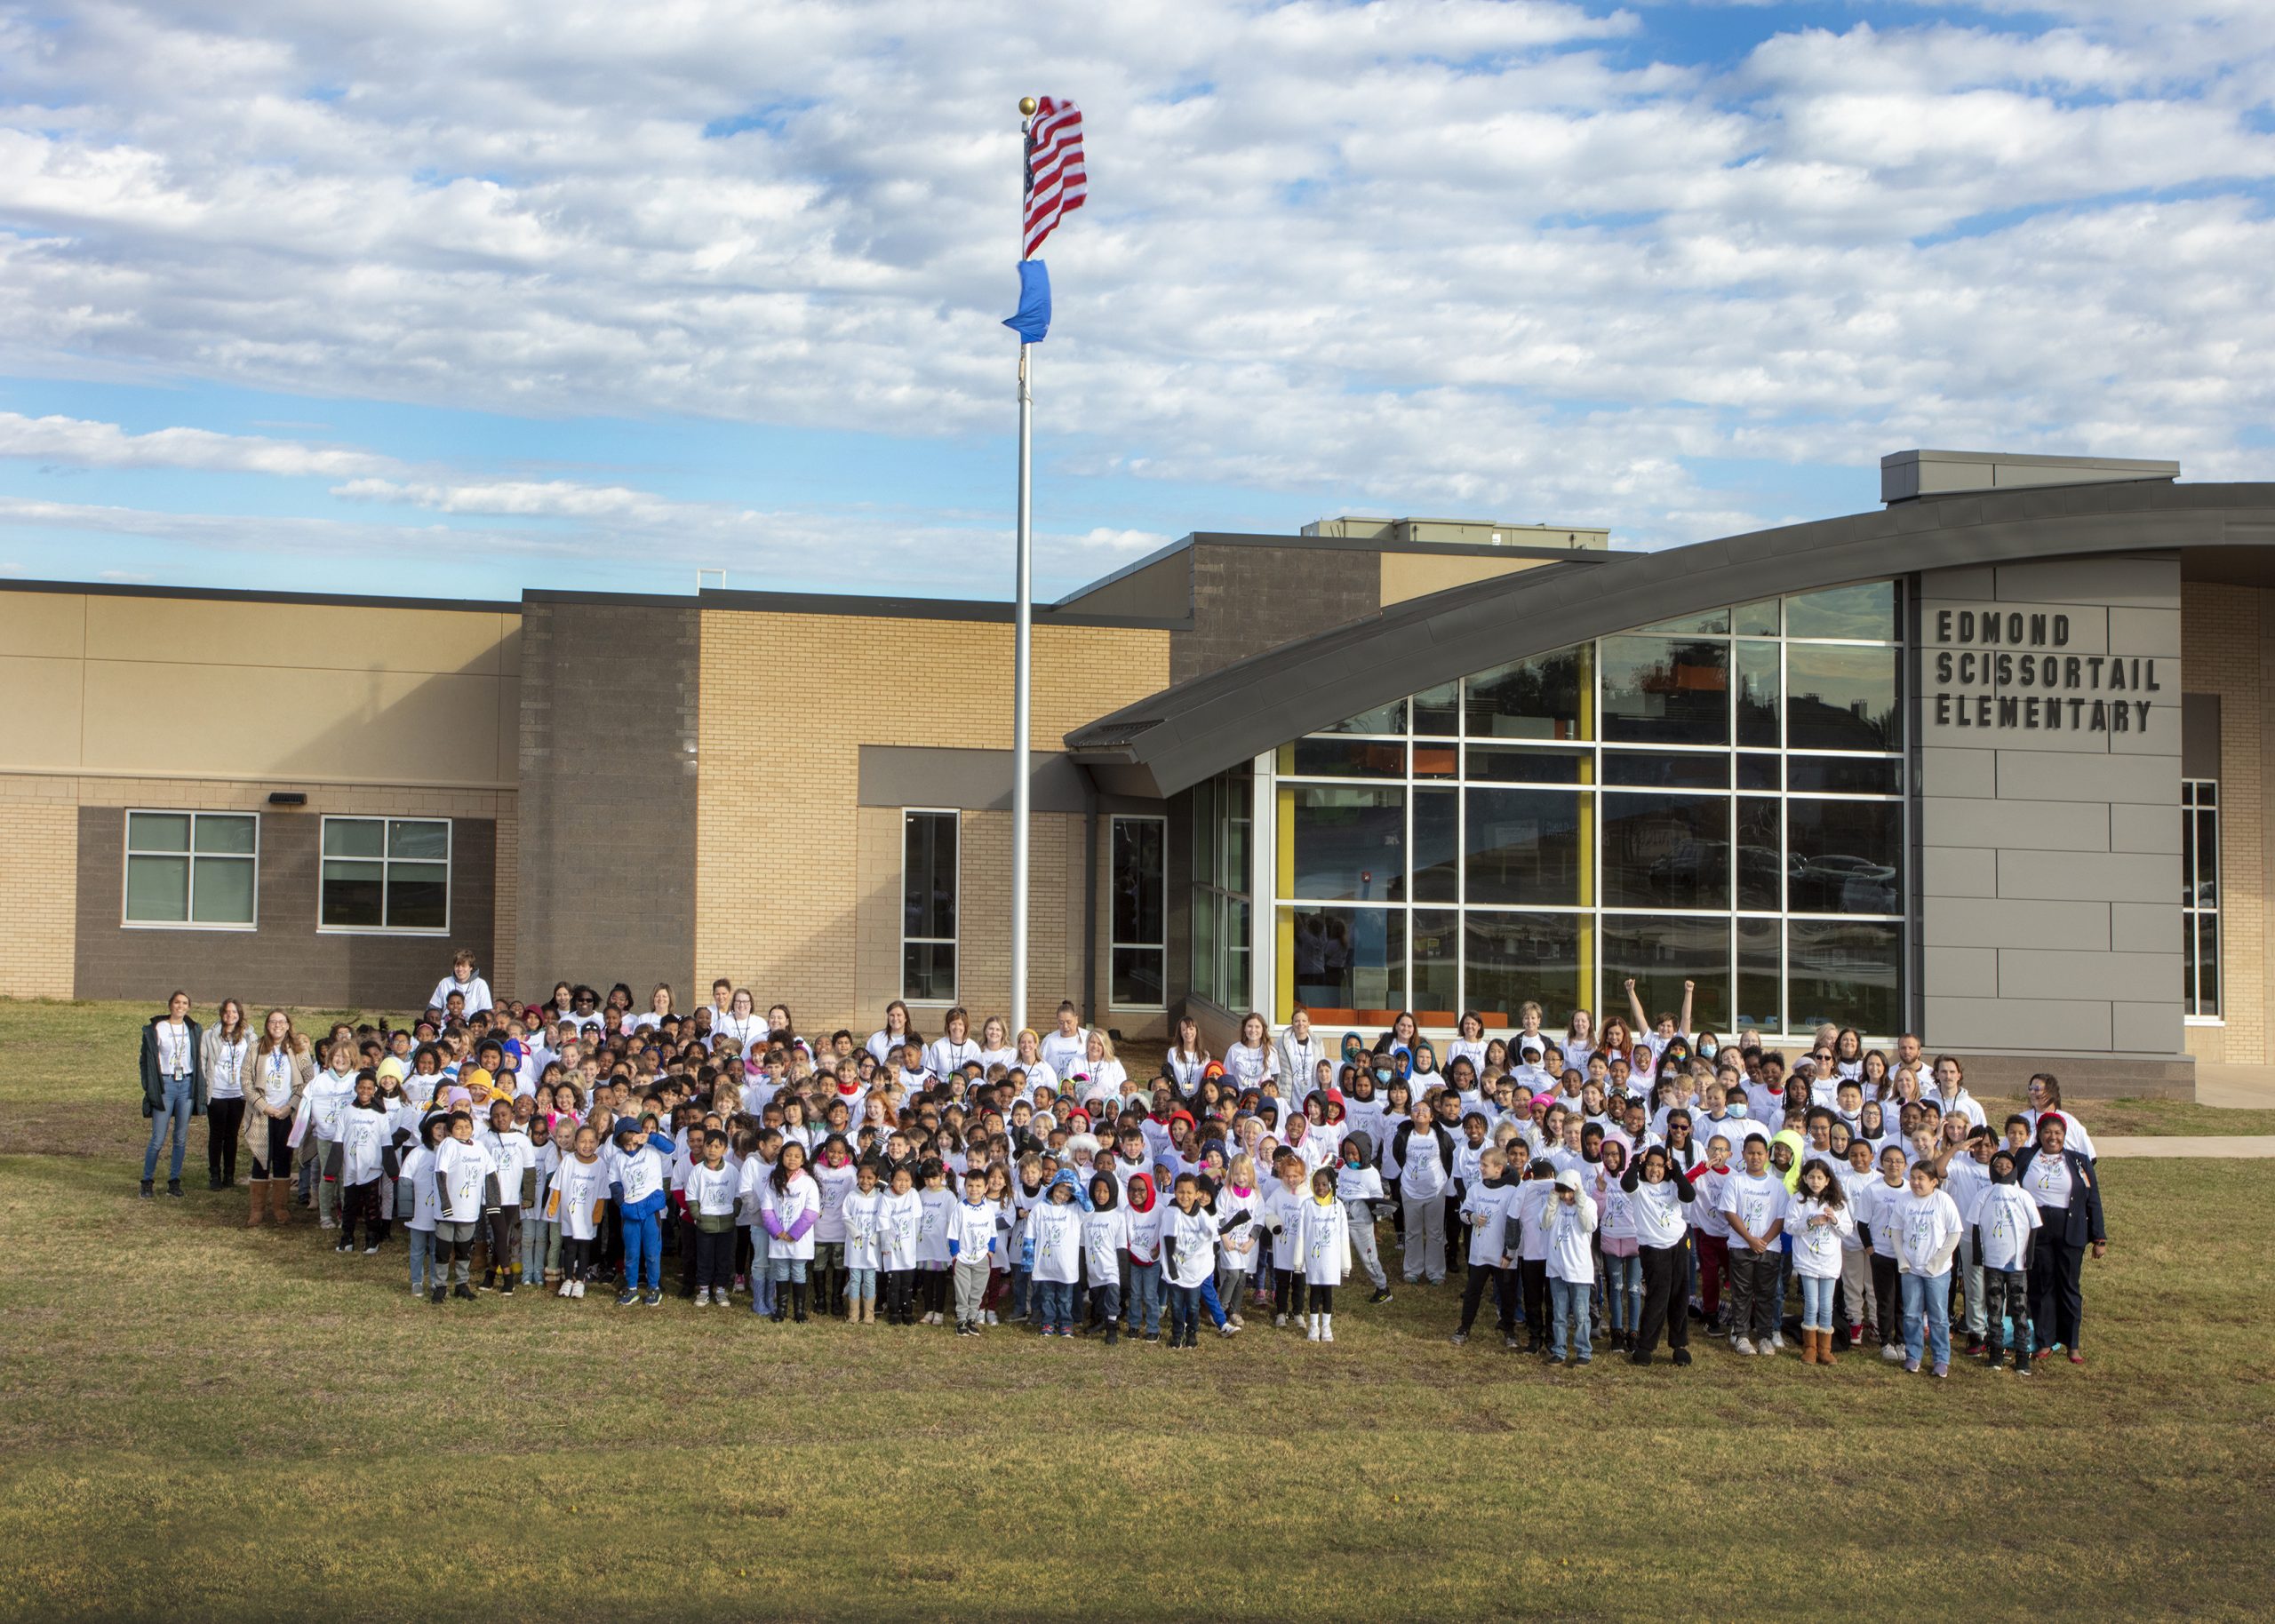 Elementary students around the flag pole